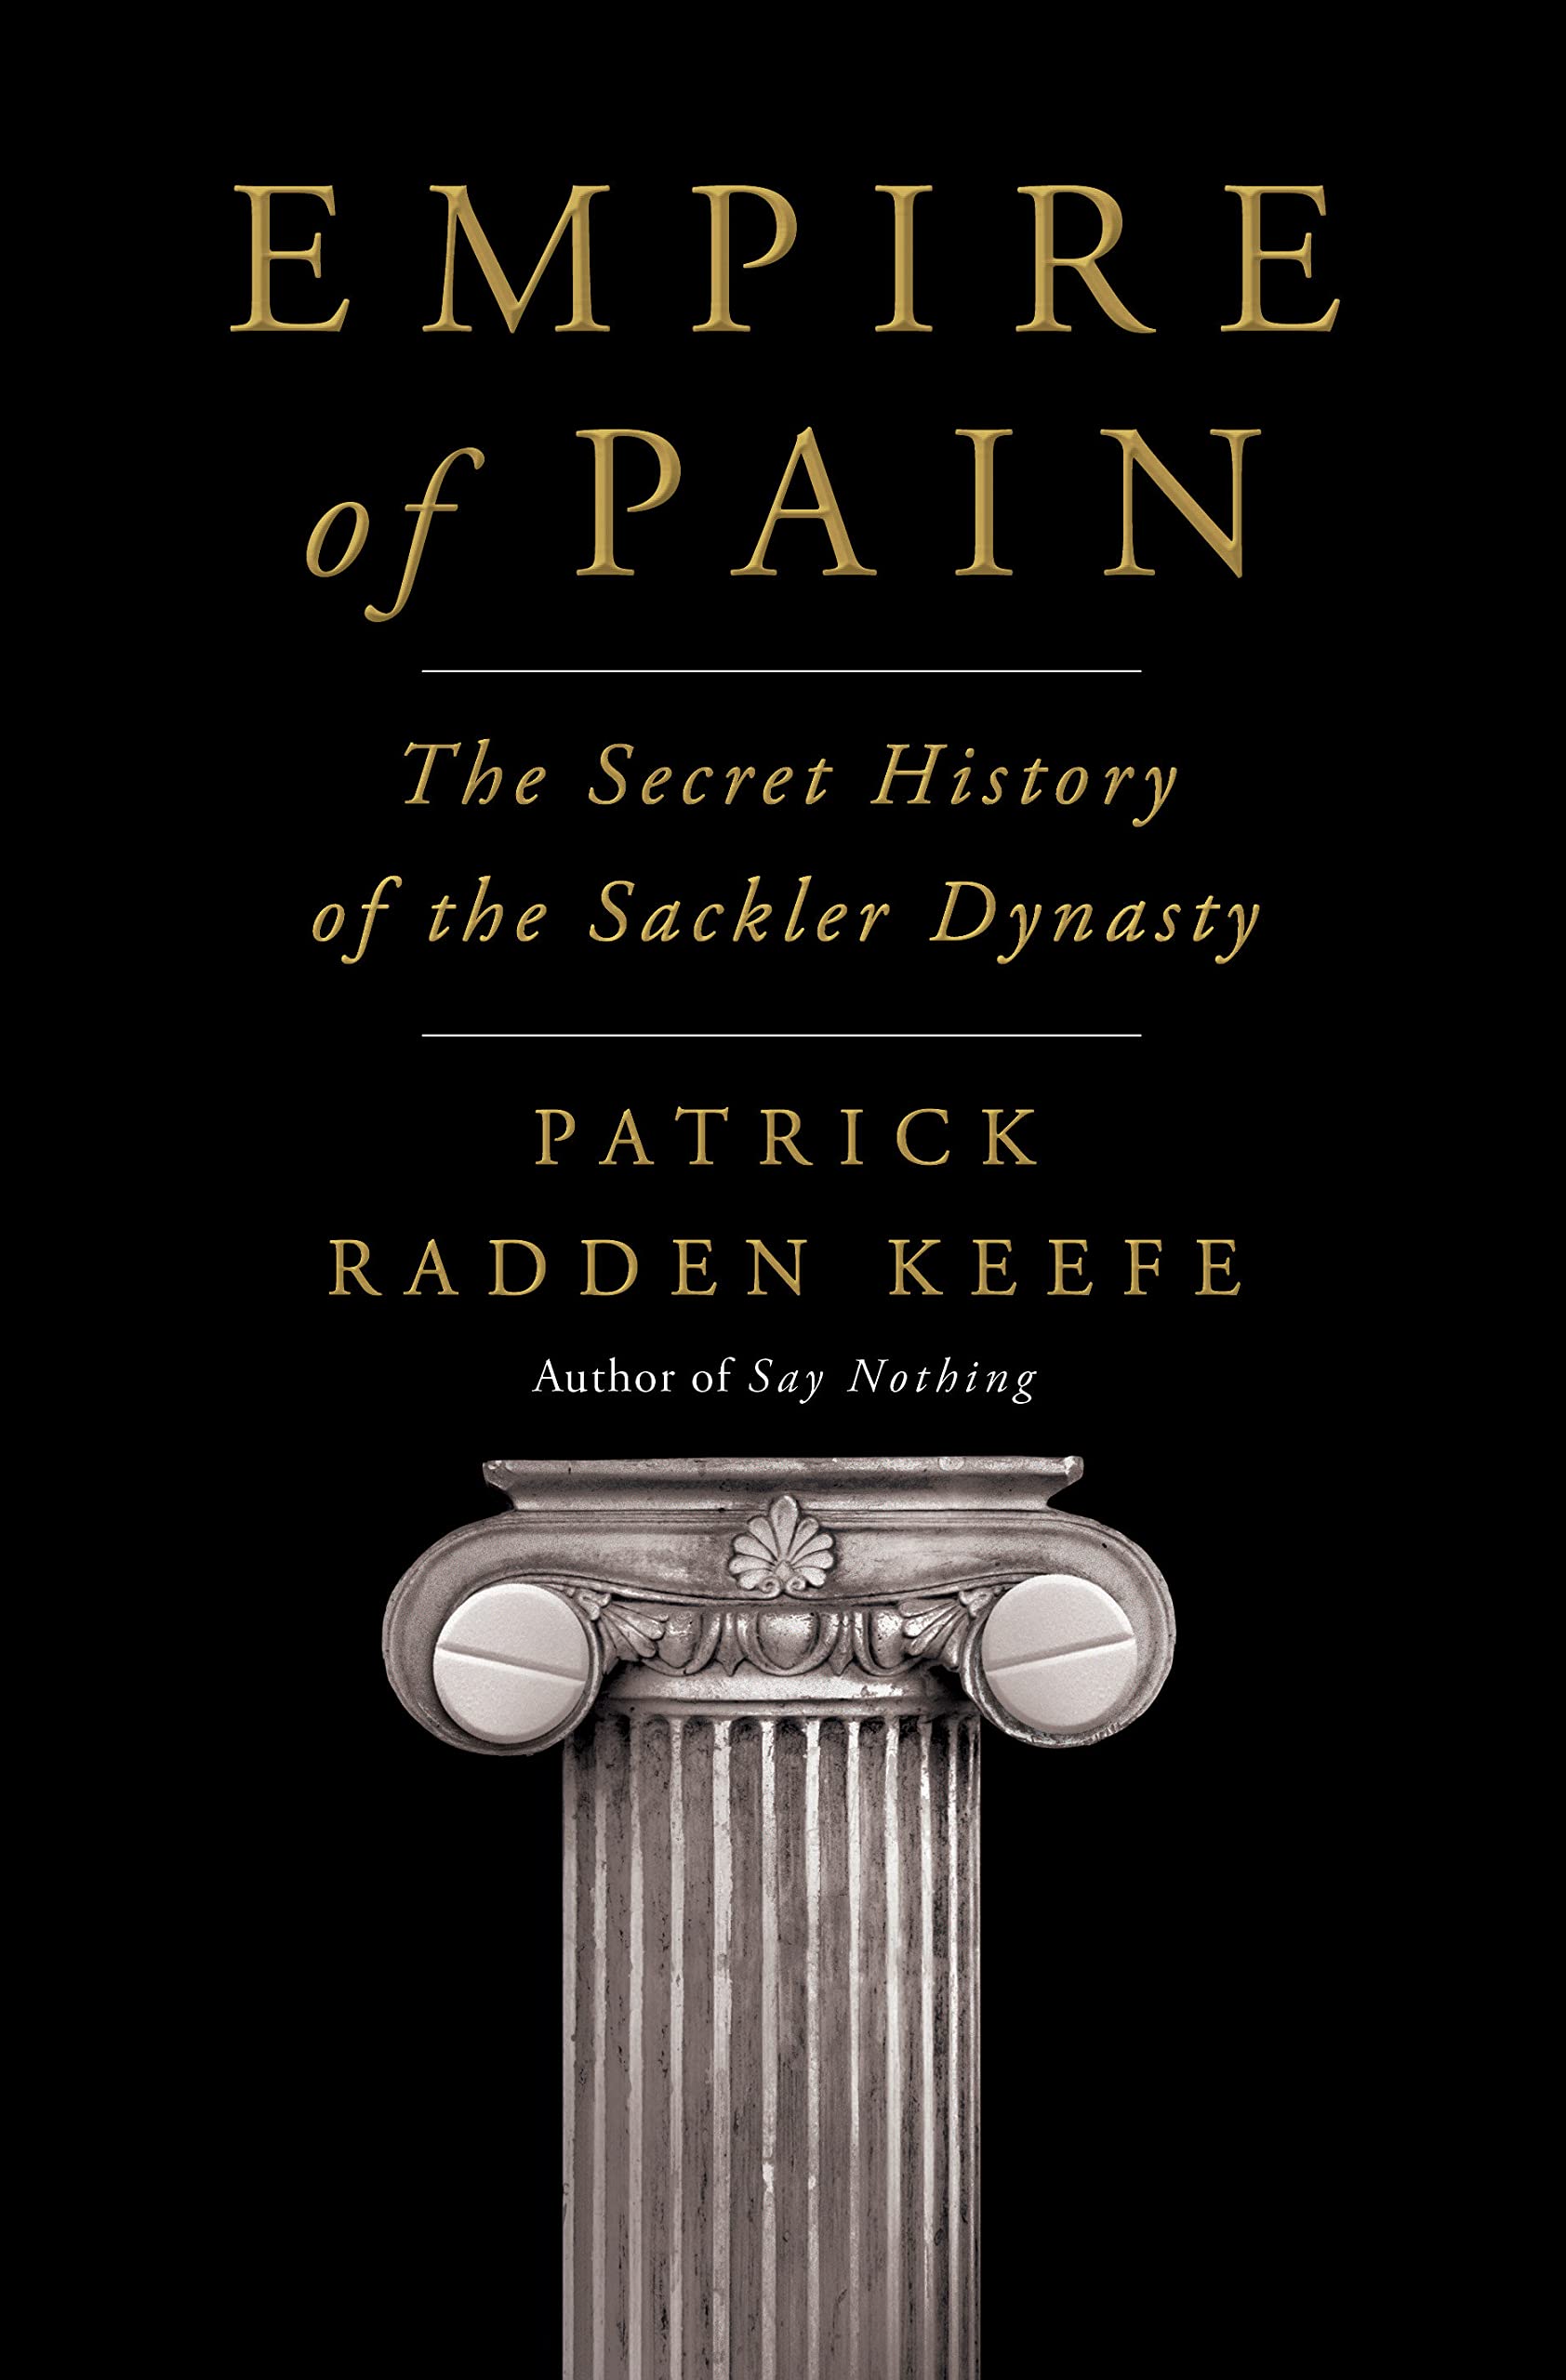 Book Cover for the book Empire of Pain: The Secret History of the Sackler Dynasty by Patrick Radden Keefe. Black cover with a white pillar that looks like Roman or Greek style architecture.   